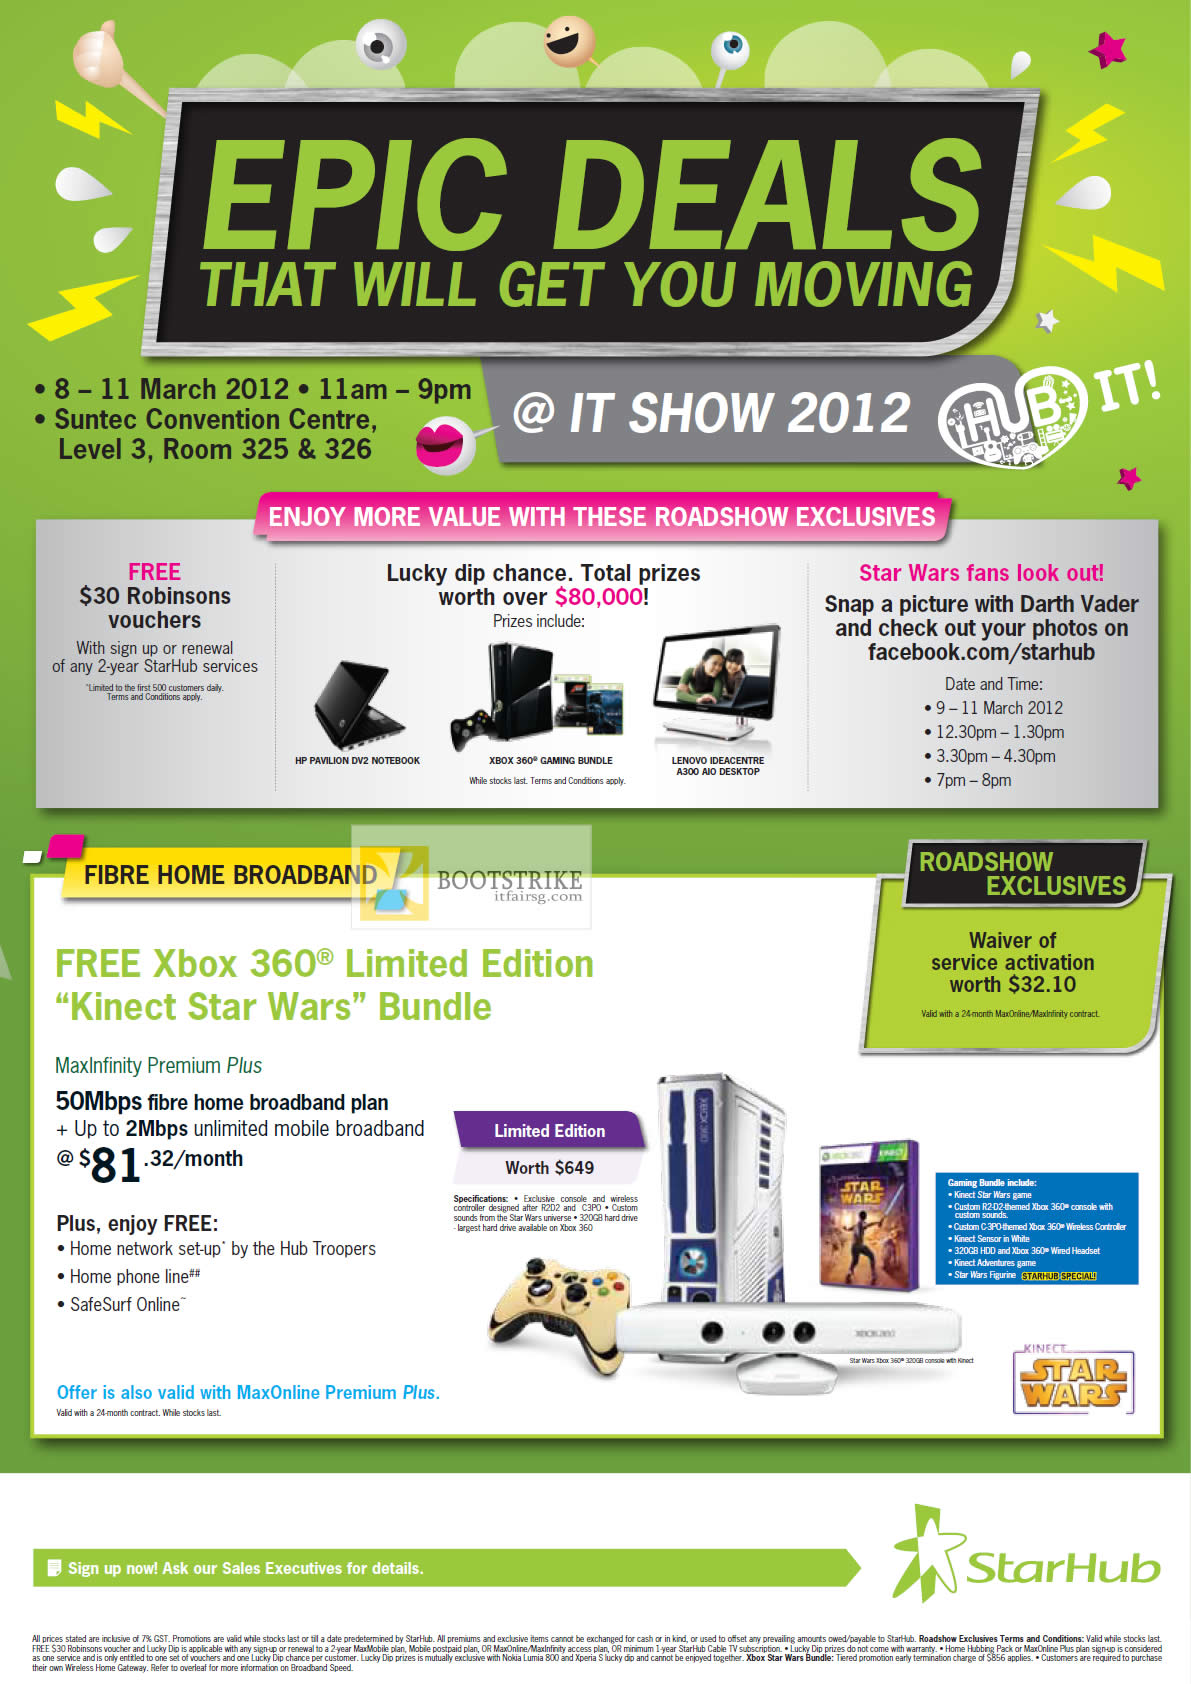 IT SHOW 2012 price list image brochure of Starhub Roadshow Exclusives, Star Wars, Robinsons Vouchers, Fibre Free Xbox Kinect 360 Star Wars Maxinfinity Premium Plus 50Mbps